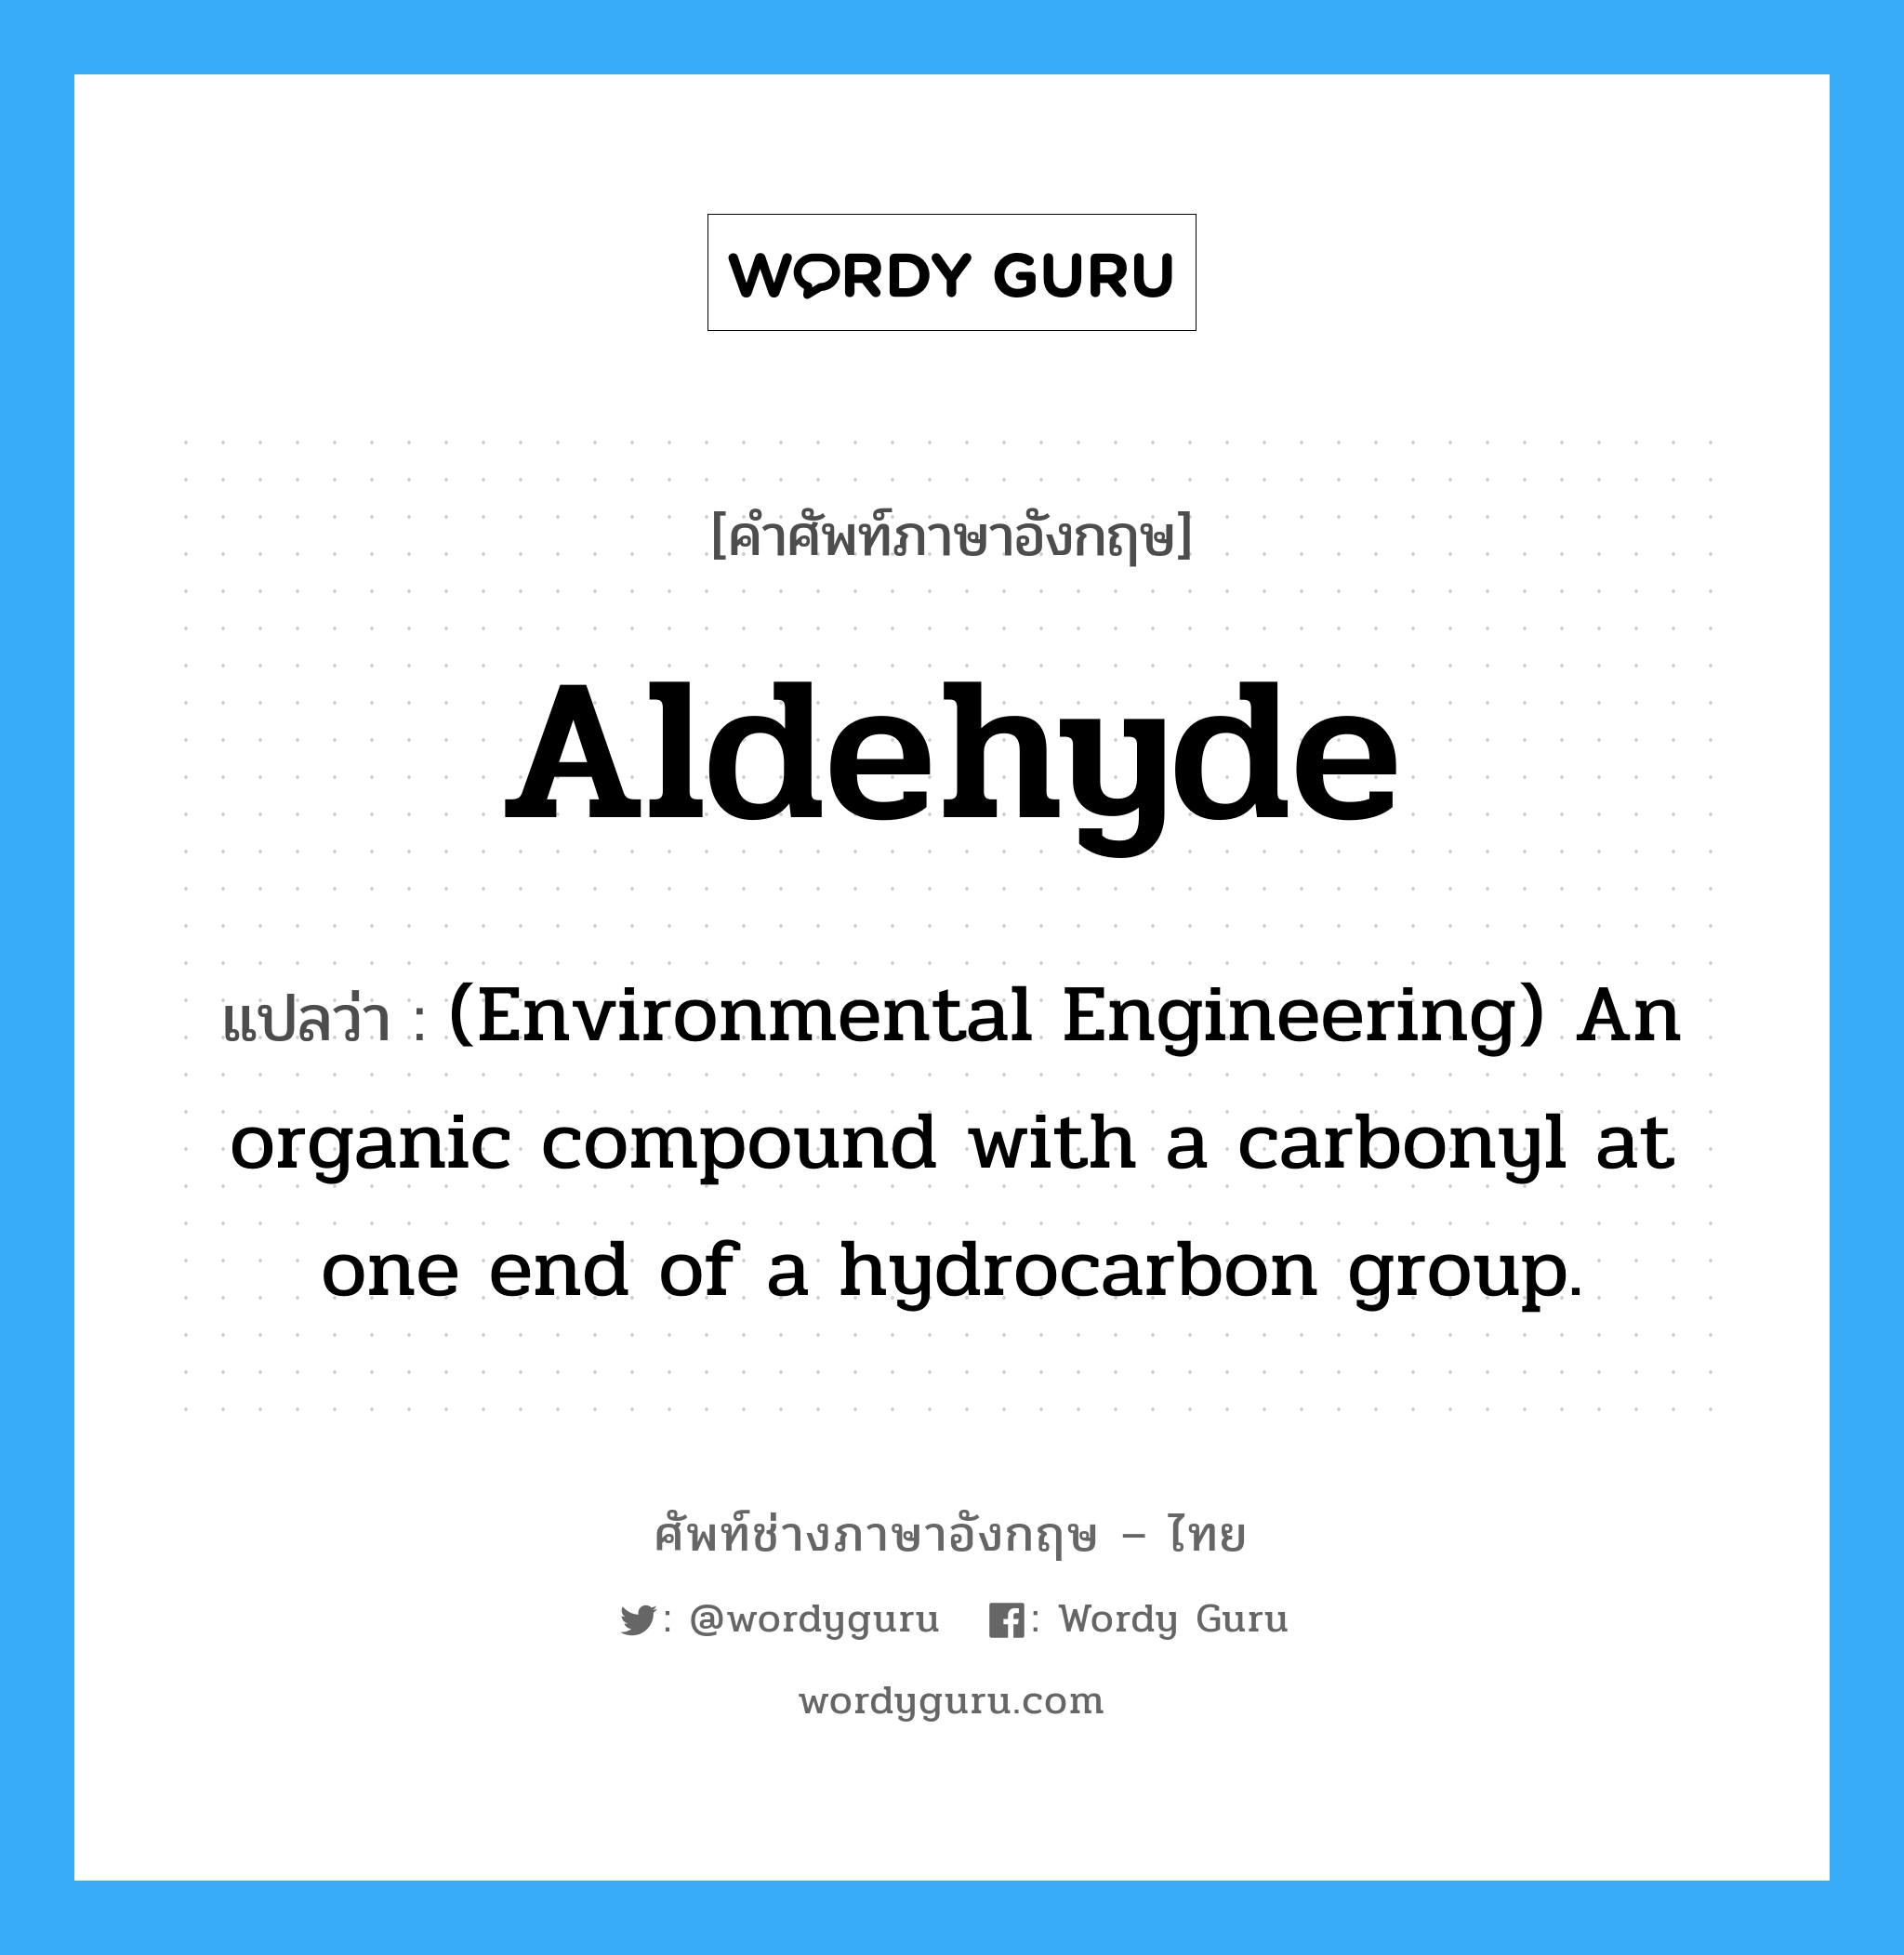 Aldehyde แปลว่า?, คำศัพท์ช่างภาษาอังกฤษ - ไทย Aldehyde คำศัพท์ภาษาอังกฤษ Aldehyde แปลว่า (Environmental Engineering) An organic compound with a carbonyl at one end of a hydrocarbon group.